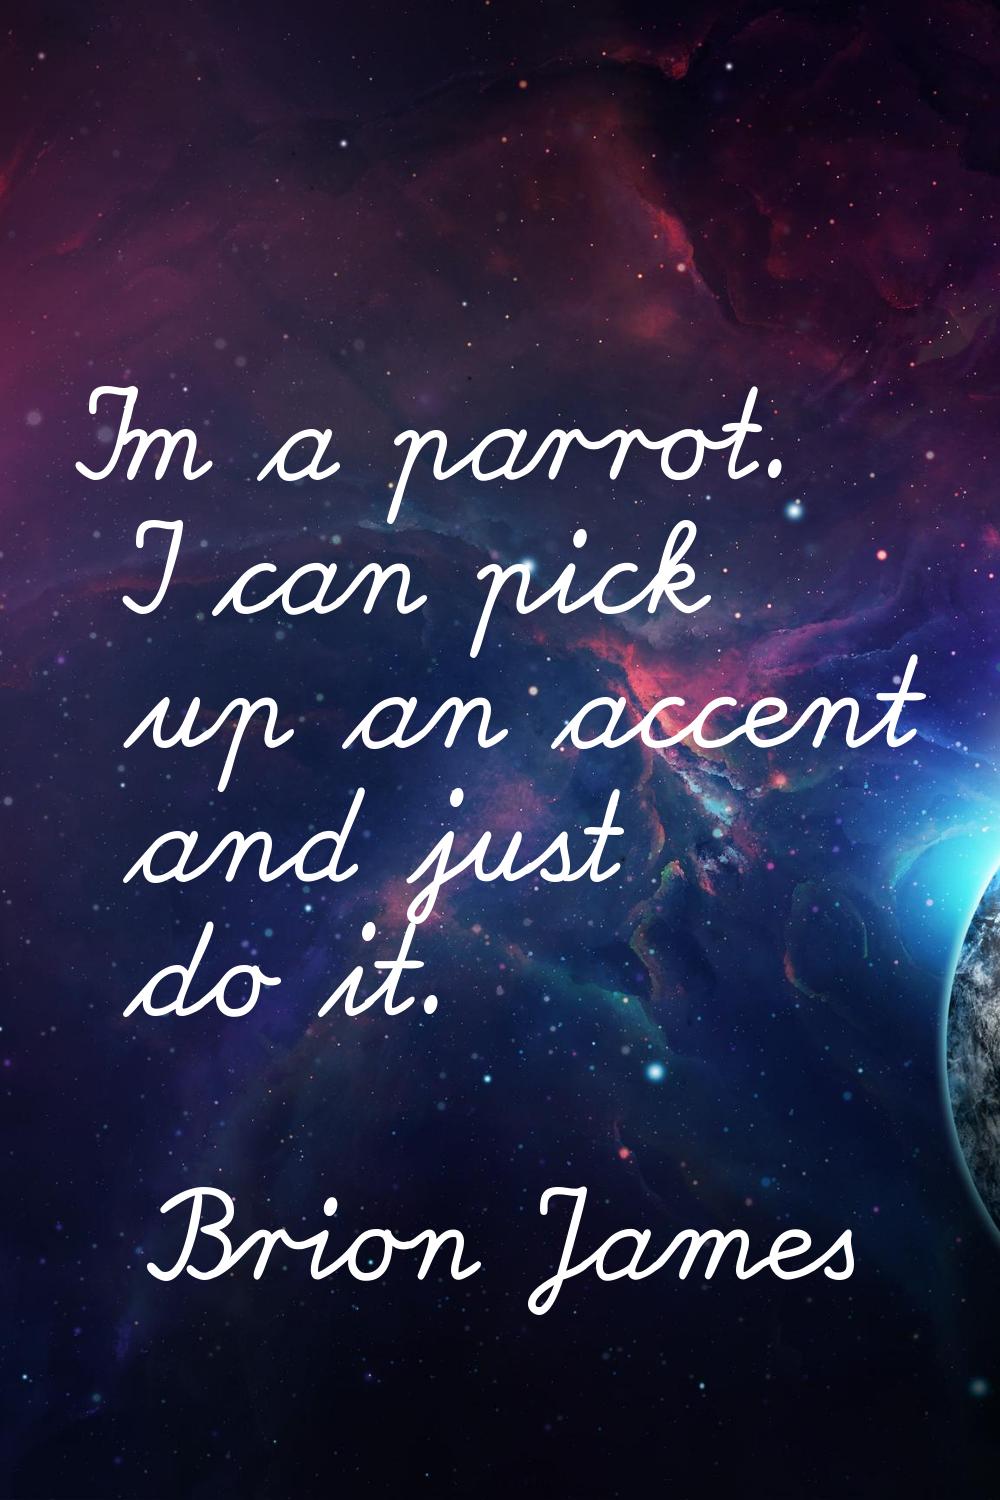 I'm a parrot. I can pick up an accent and just do it.